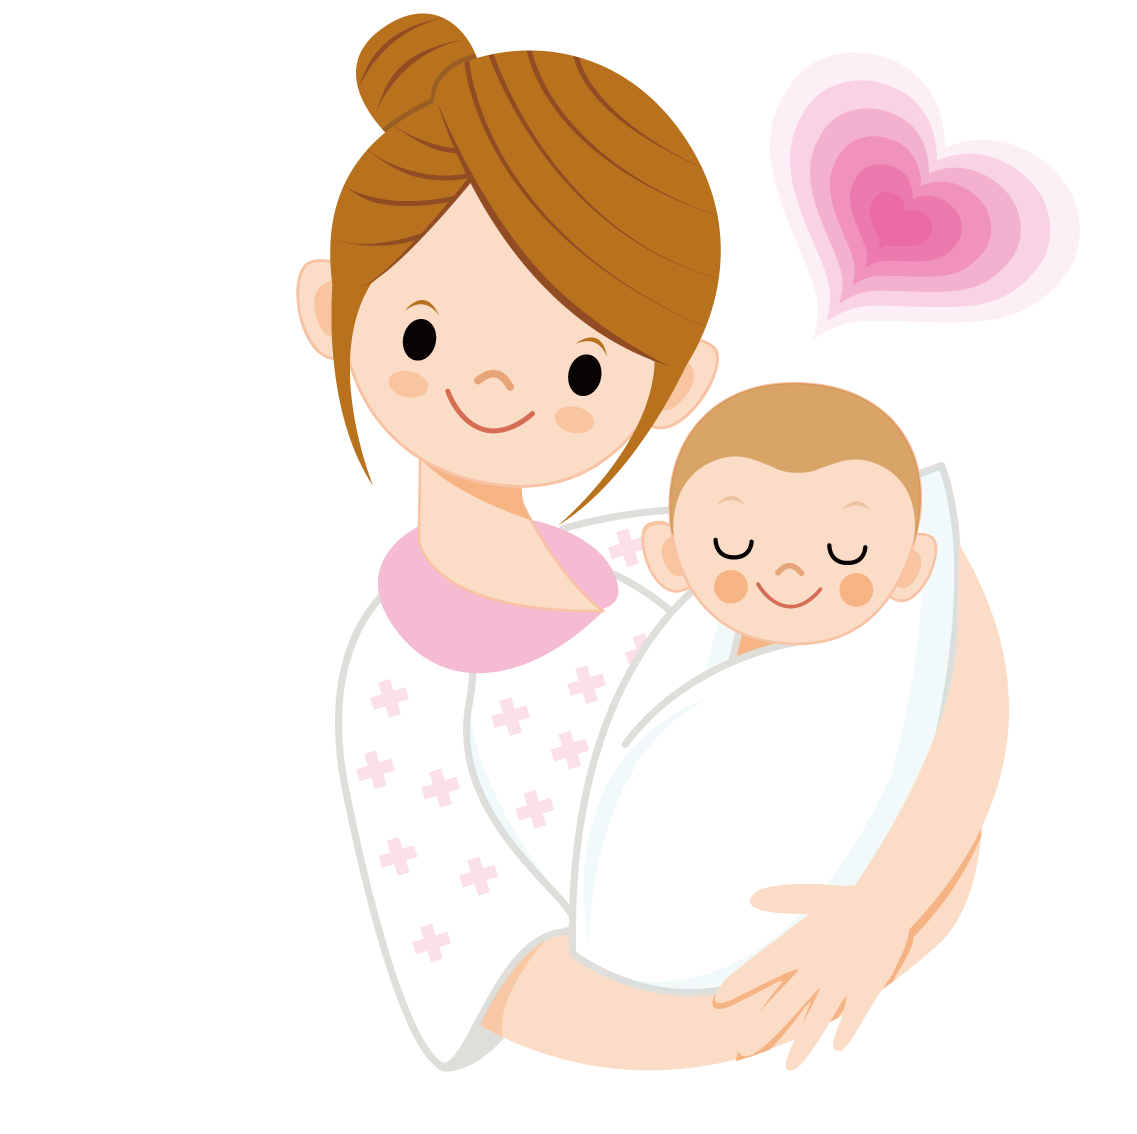 Cartoon Mother And Son Vector PNG, Vector, PSD, and Clipart With Transparent Background for Free ...